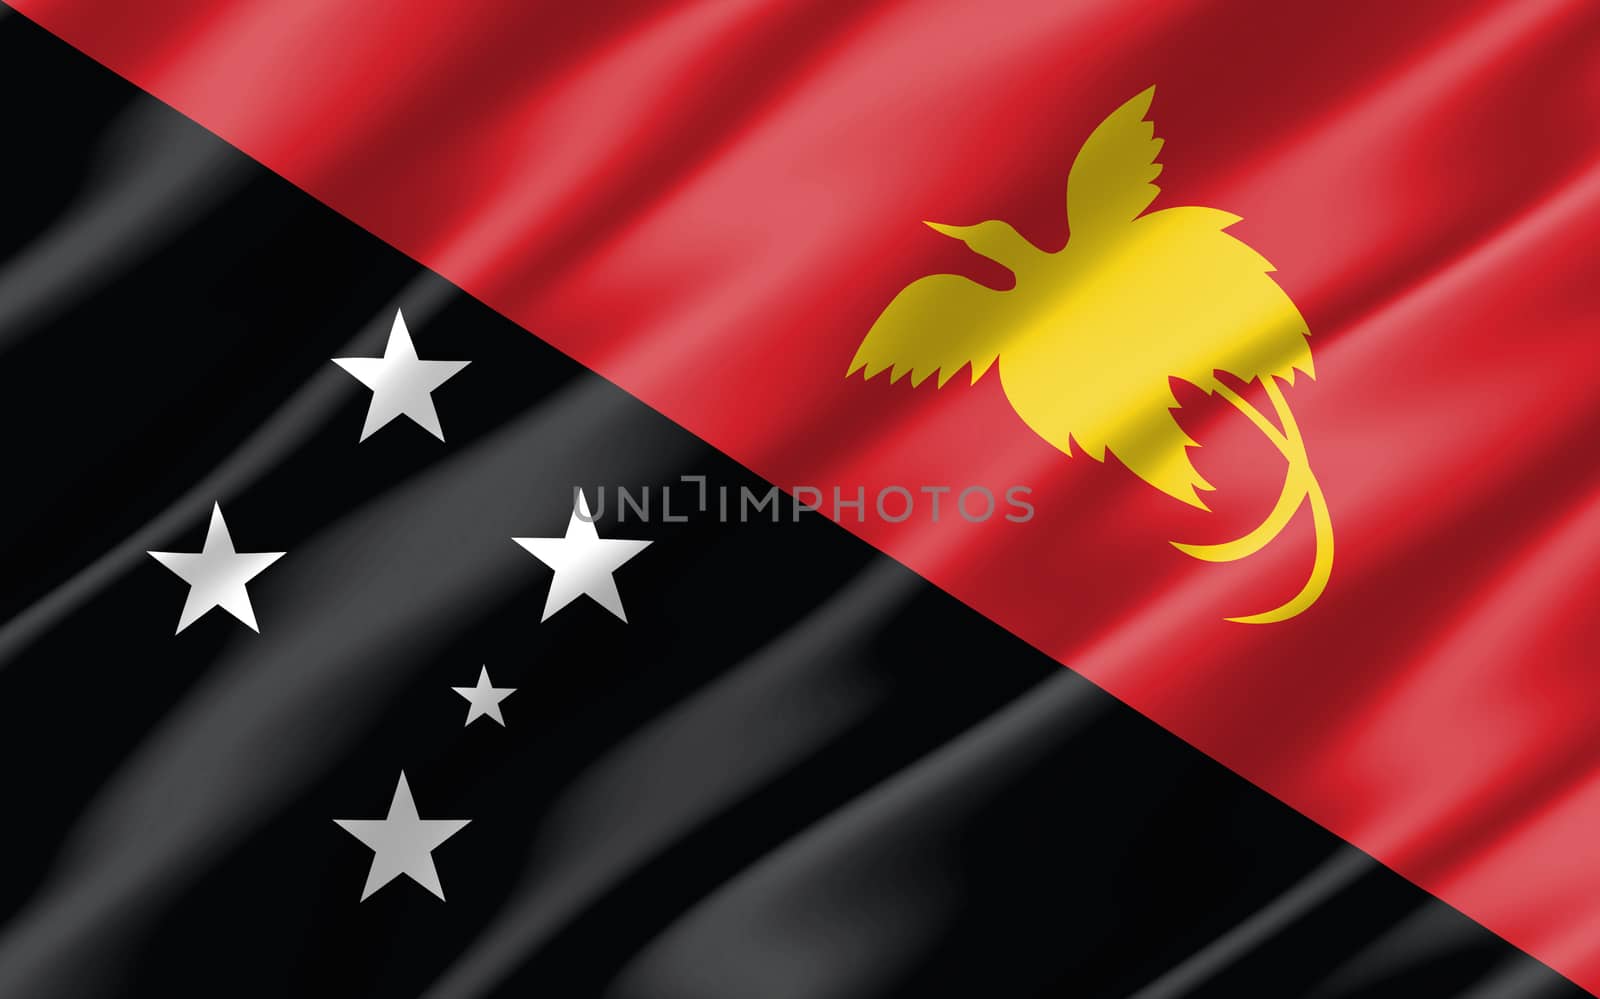 Silk wavy flag of Papua New Guinea graphic. Wavy Papuan flag illustration. Rippled Papua New Guinea country flag is a symbol of freedom, patriotism and independence. by Skylark